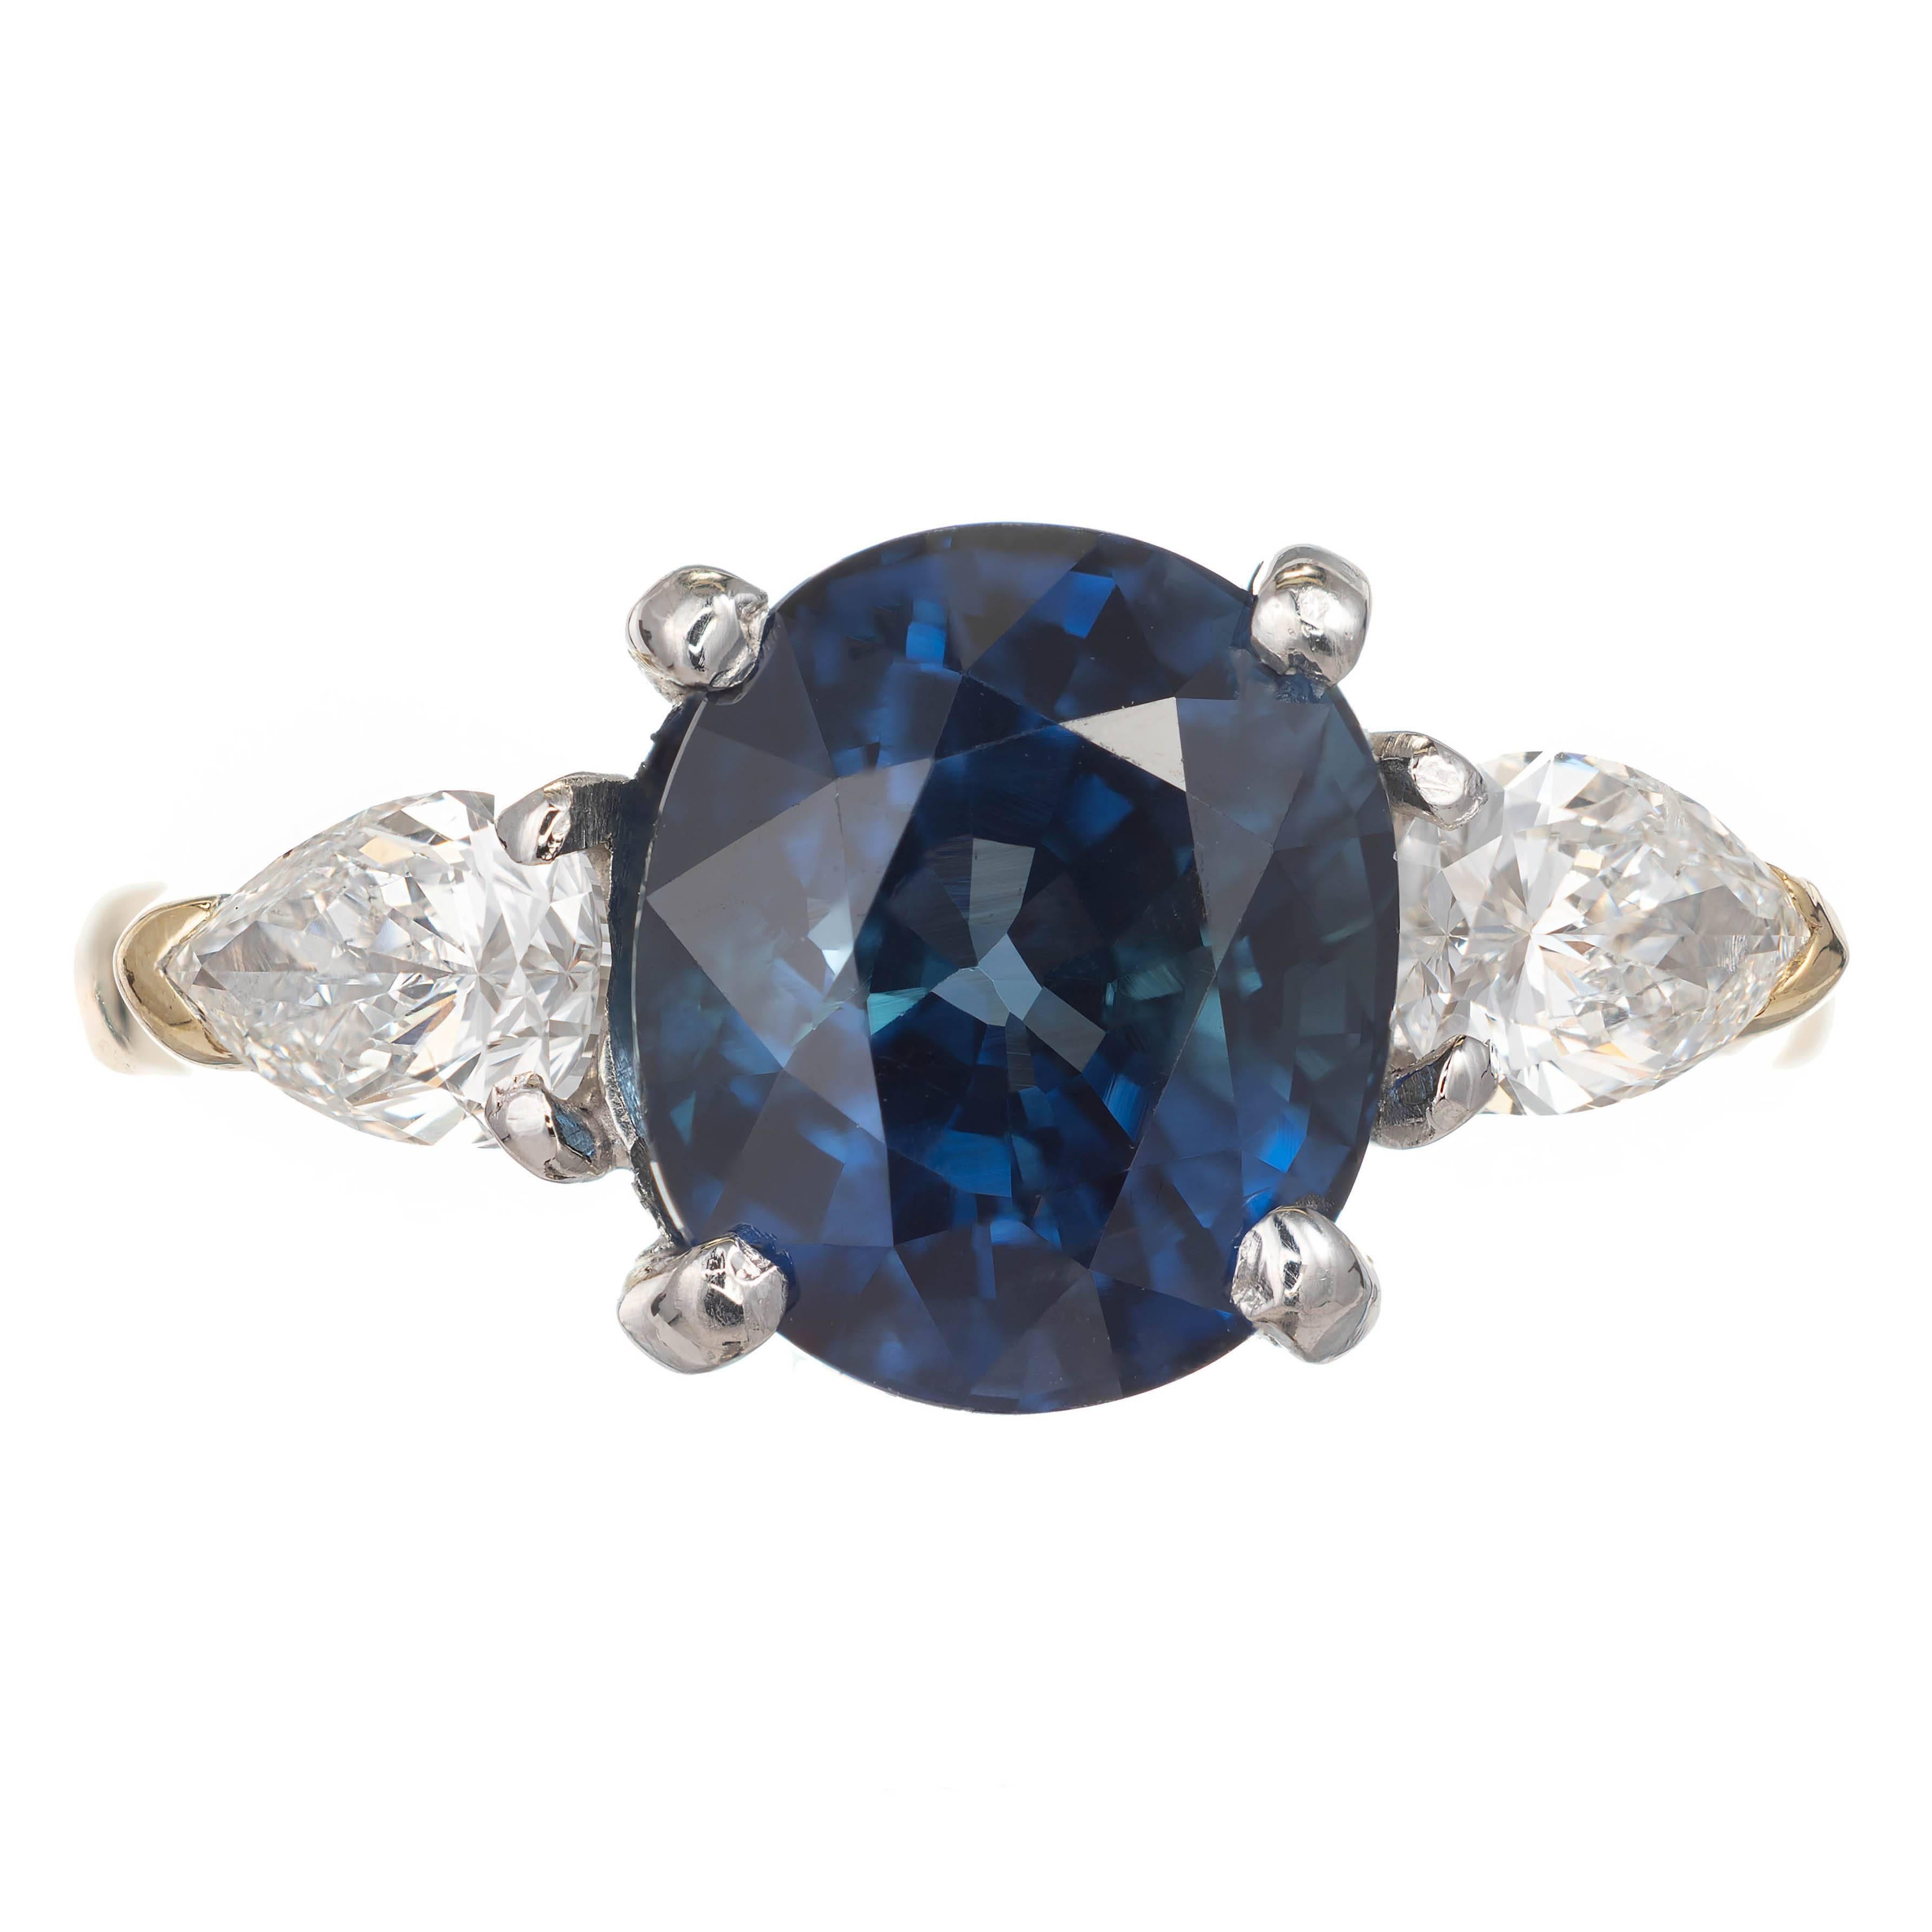 Natural no heat Royal blue fine oval Sapphire and pear shaped diamond engagement ring. In its original handmade 18k yellow gold and platinum setting with bright sparkly pear shaped side diamonds.

1 oval no heat and no enhancements 4.35ct blue